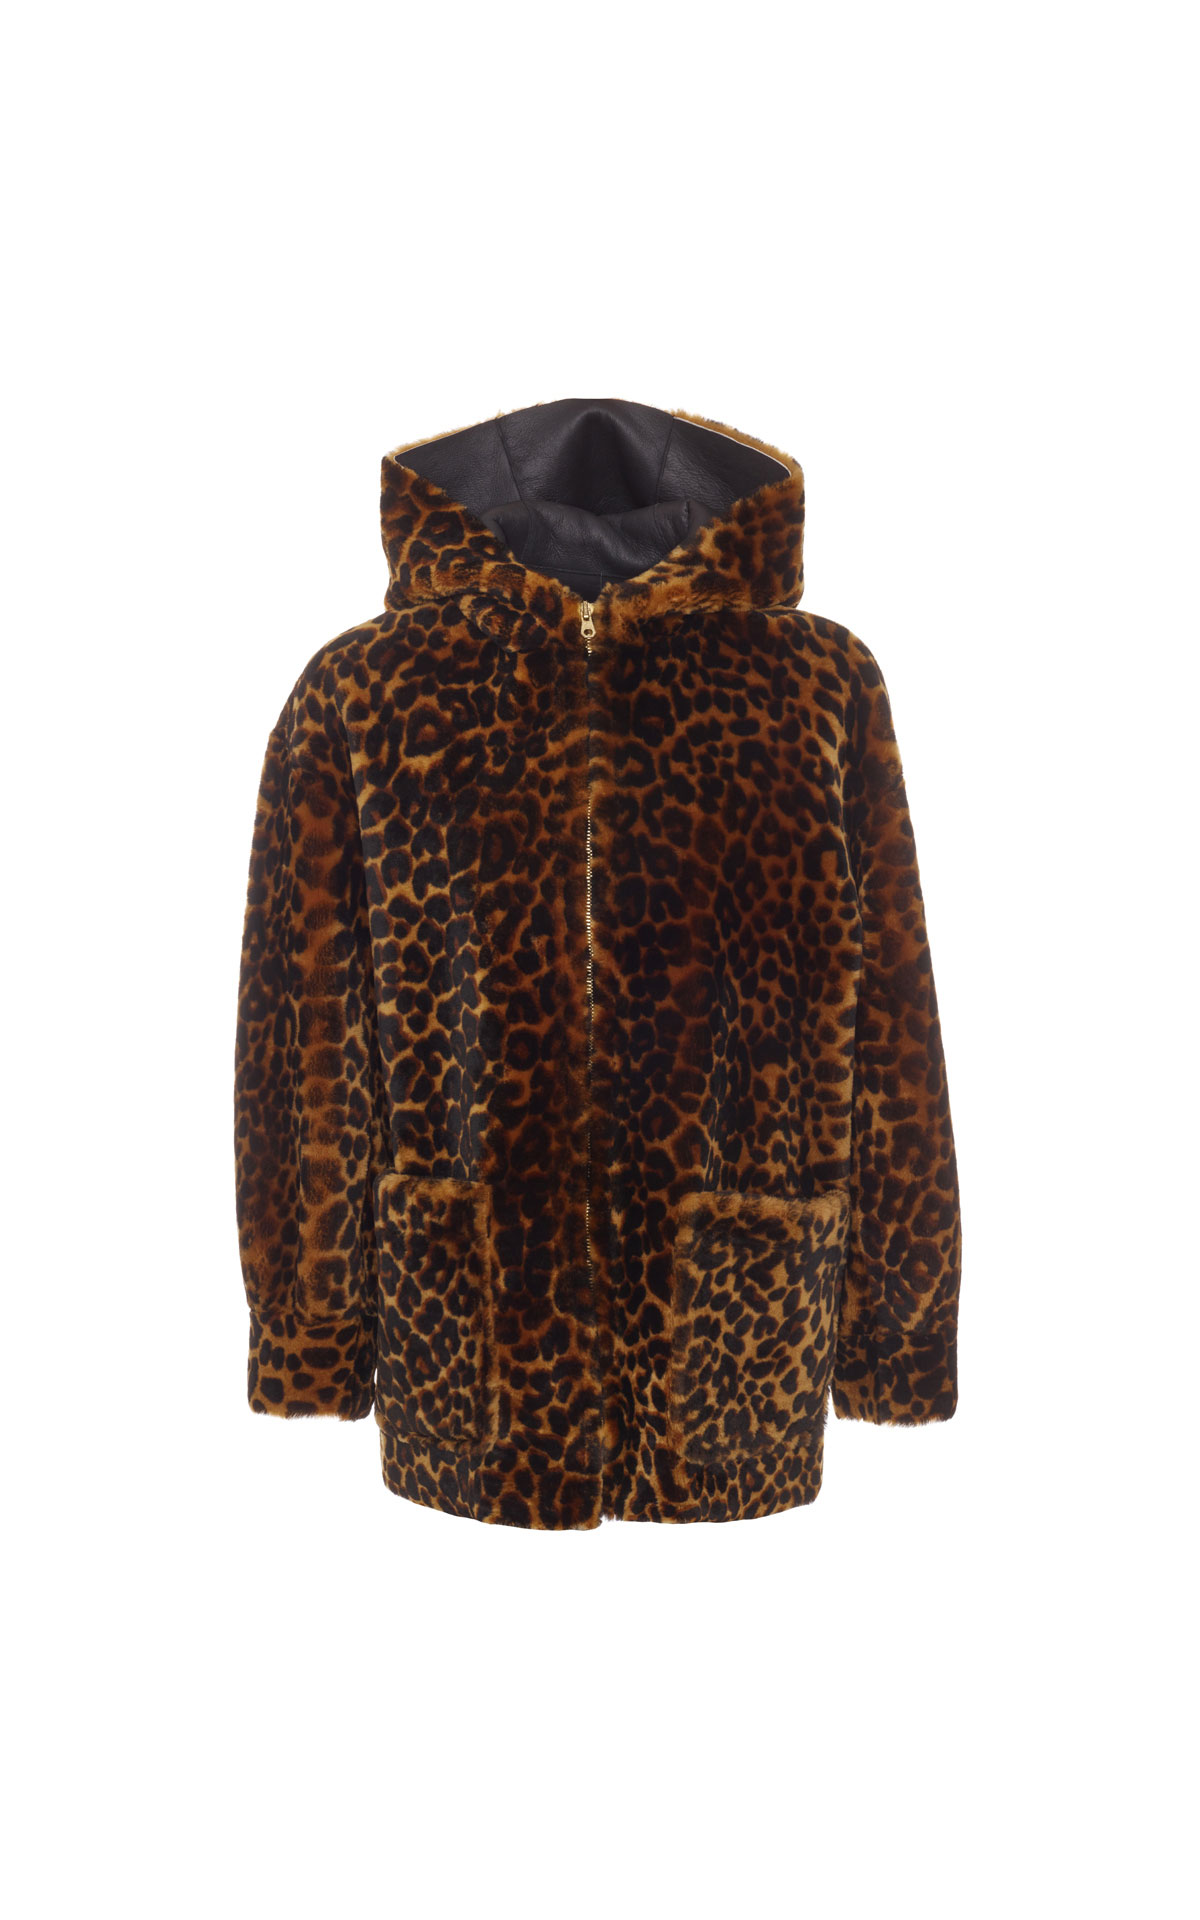 Sandro Leopard coat from Bicester Village